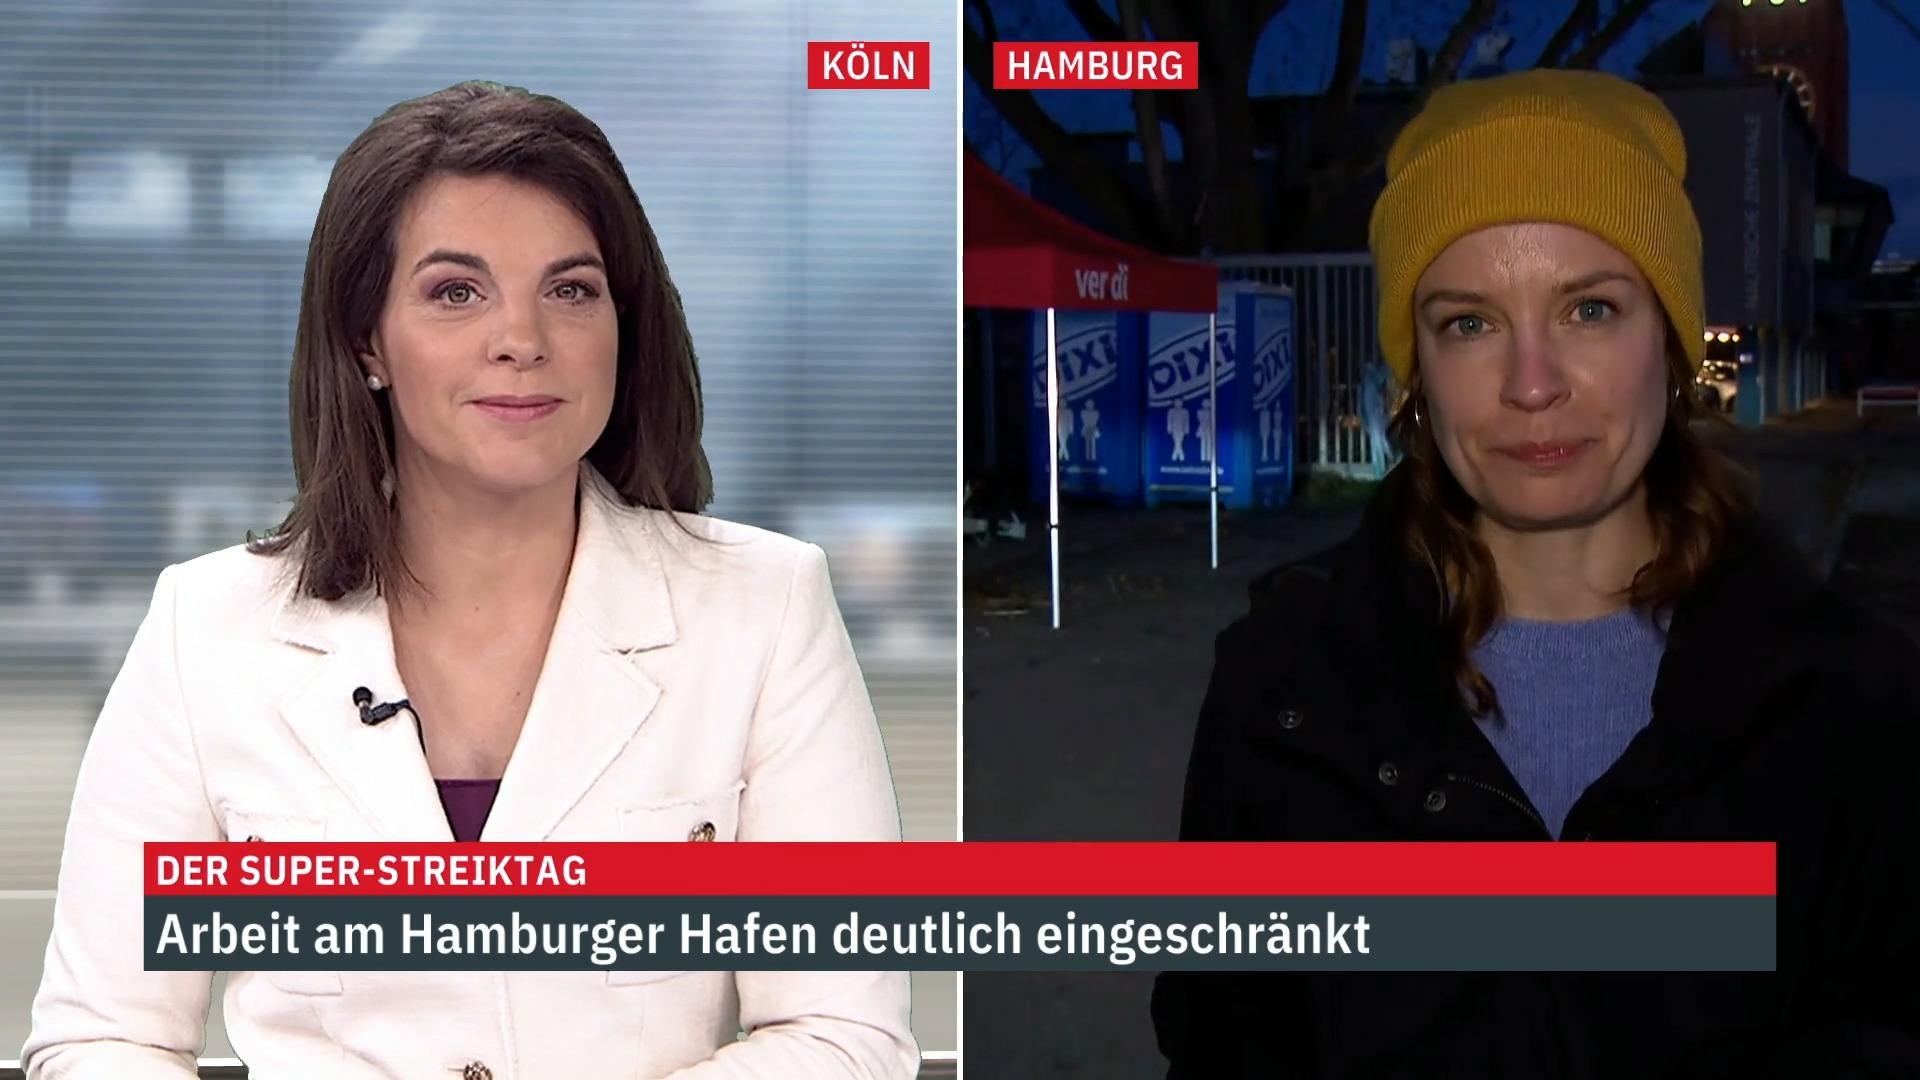 RTL reporter: Work in the port of Hamburg is restricted on the day of the big strike in Hamburg